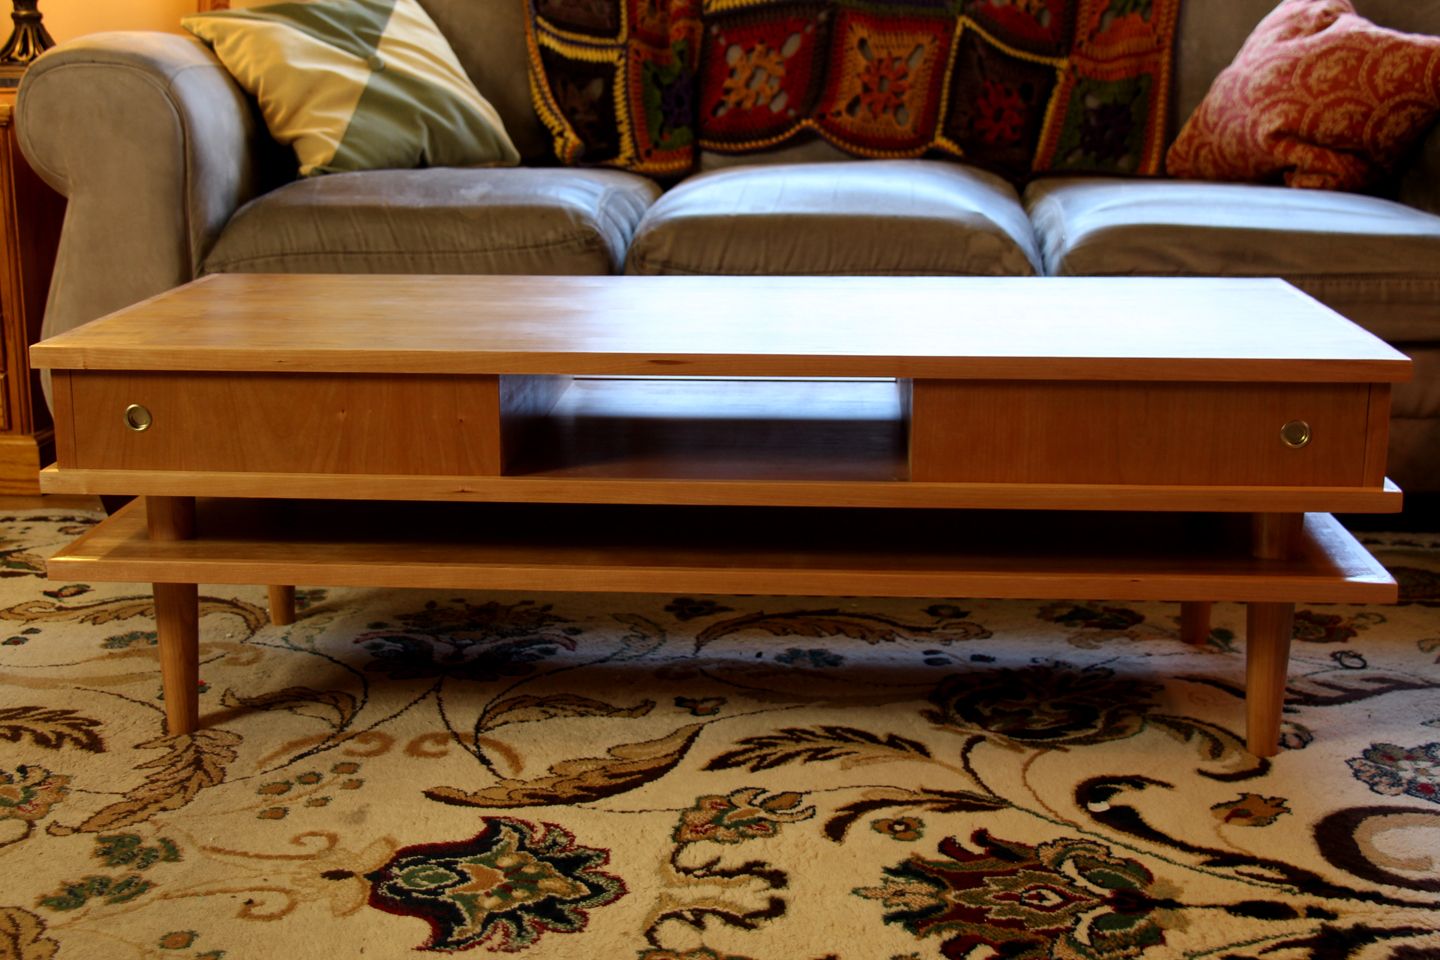 Build a Coffee Table Plans